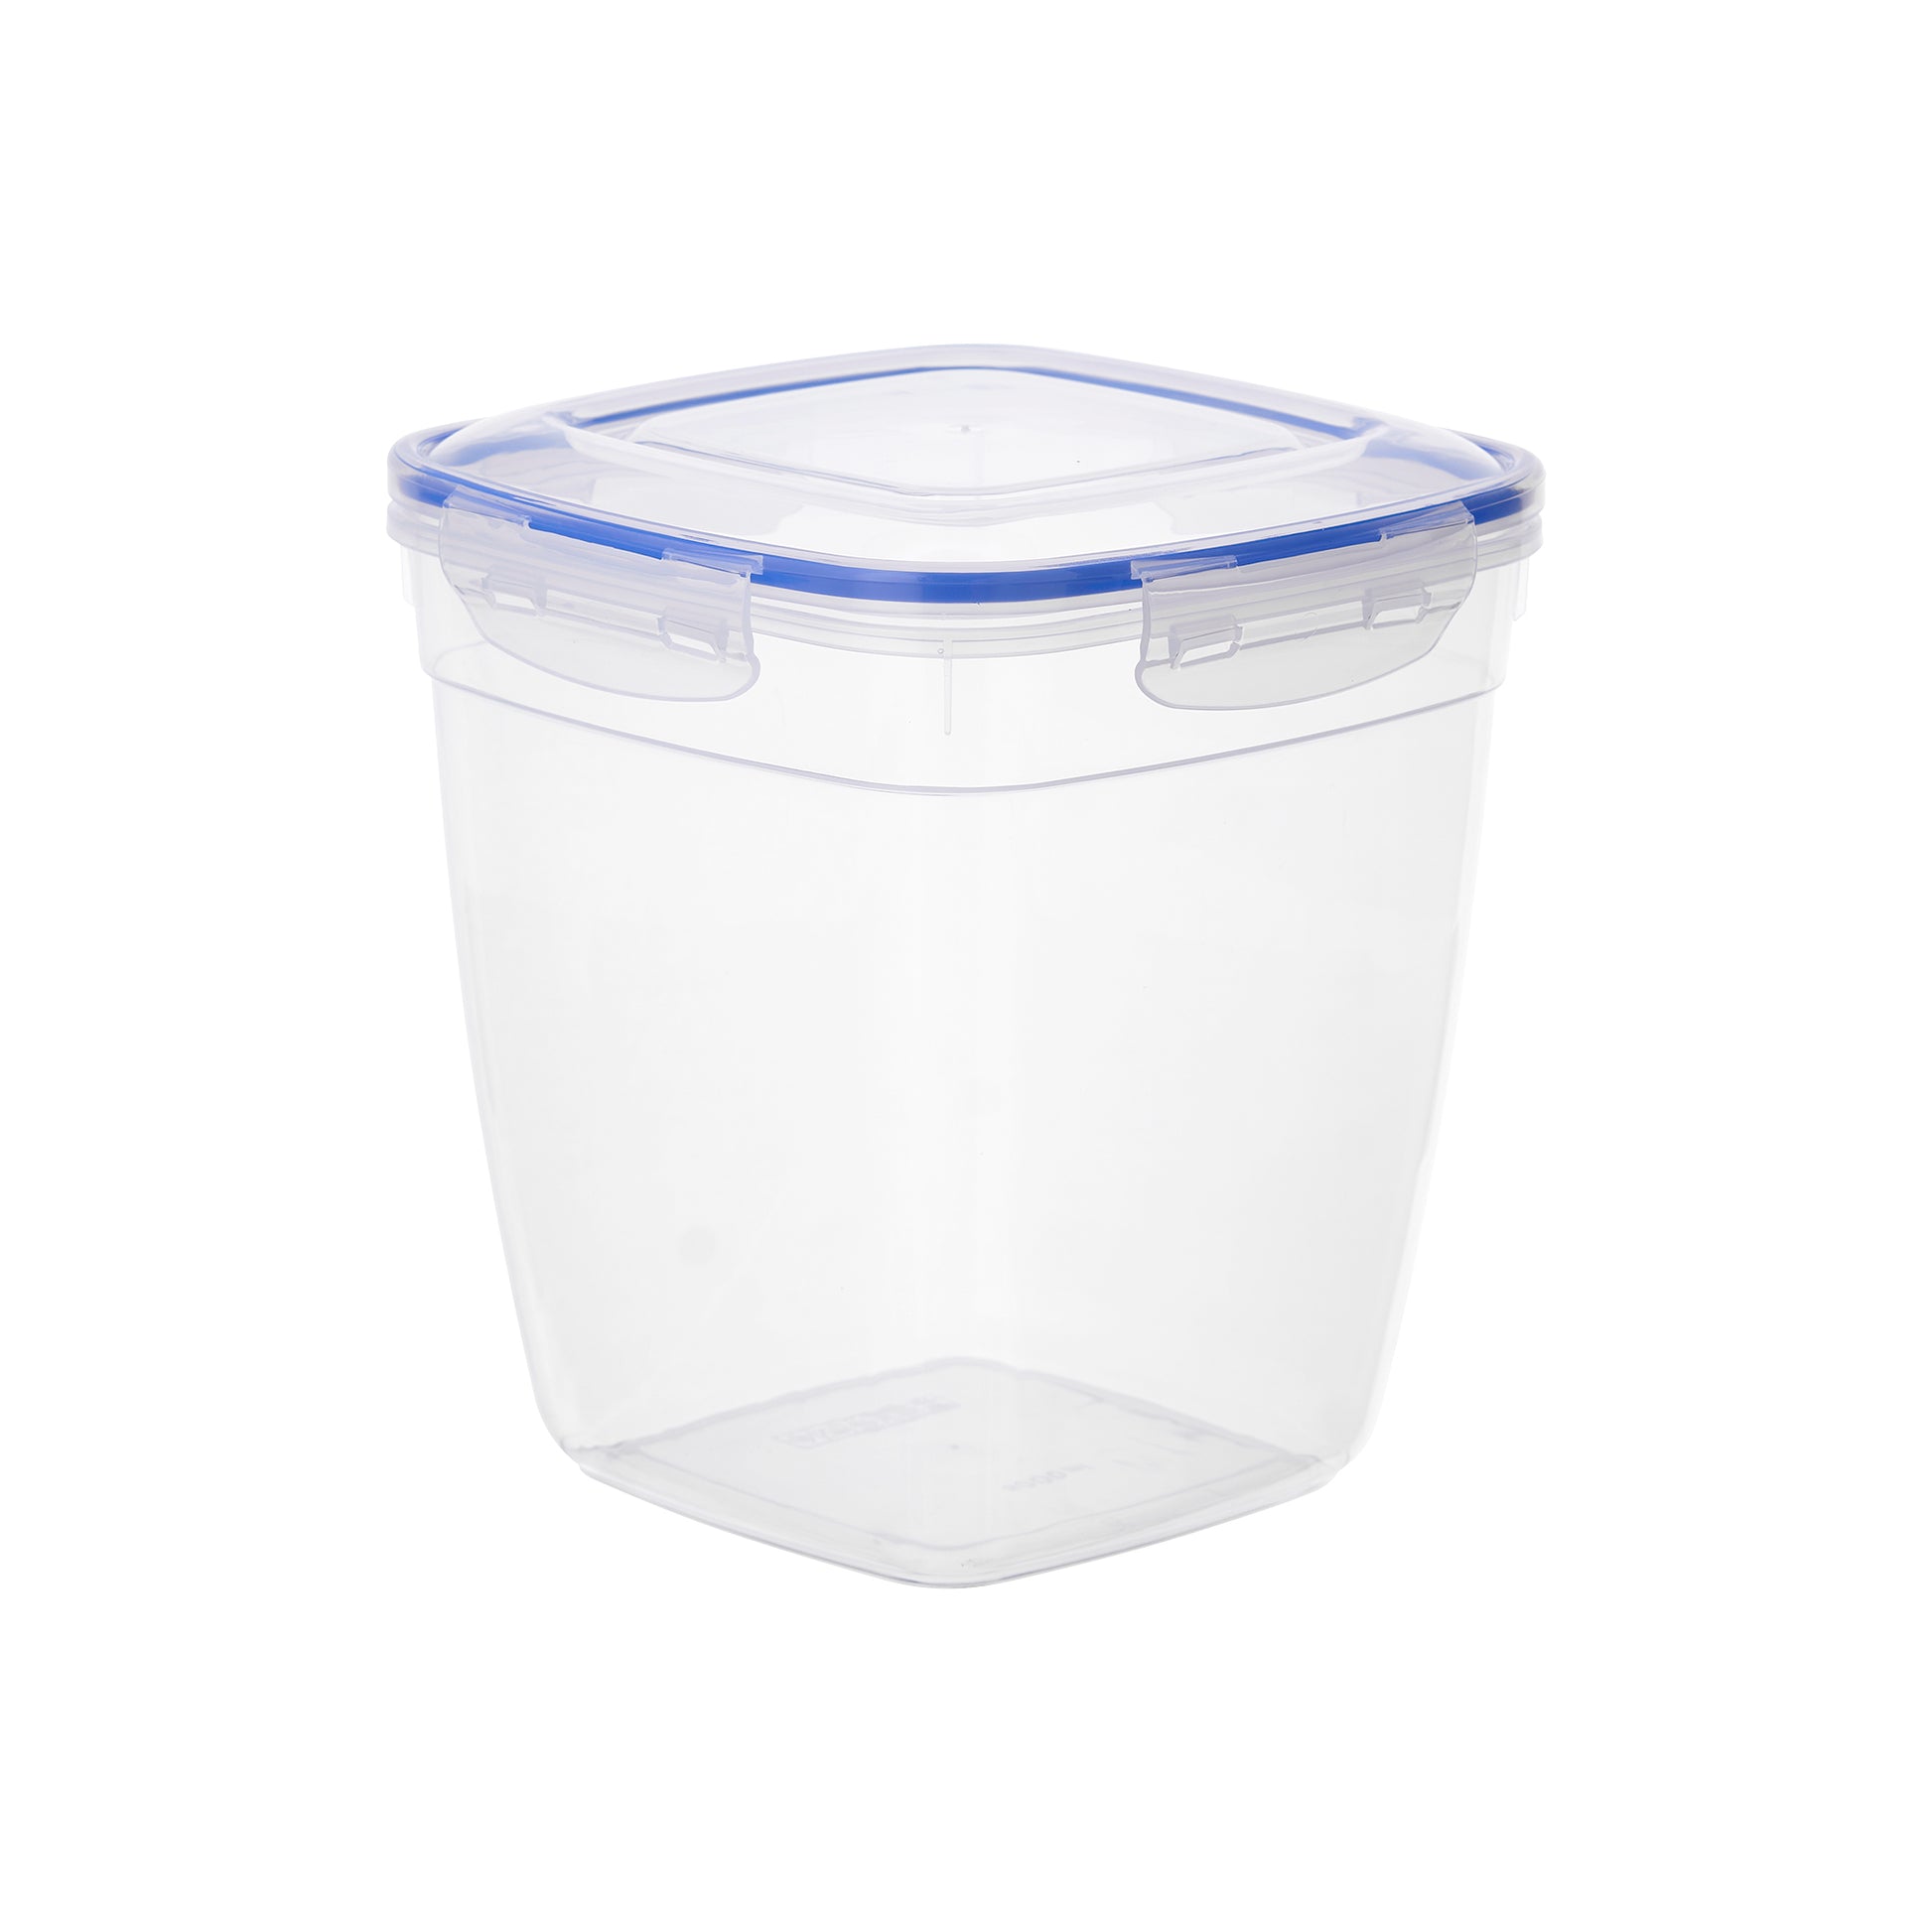 Airtight Food Storage Containers With Lids, Plastic Containers For